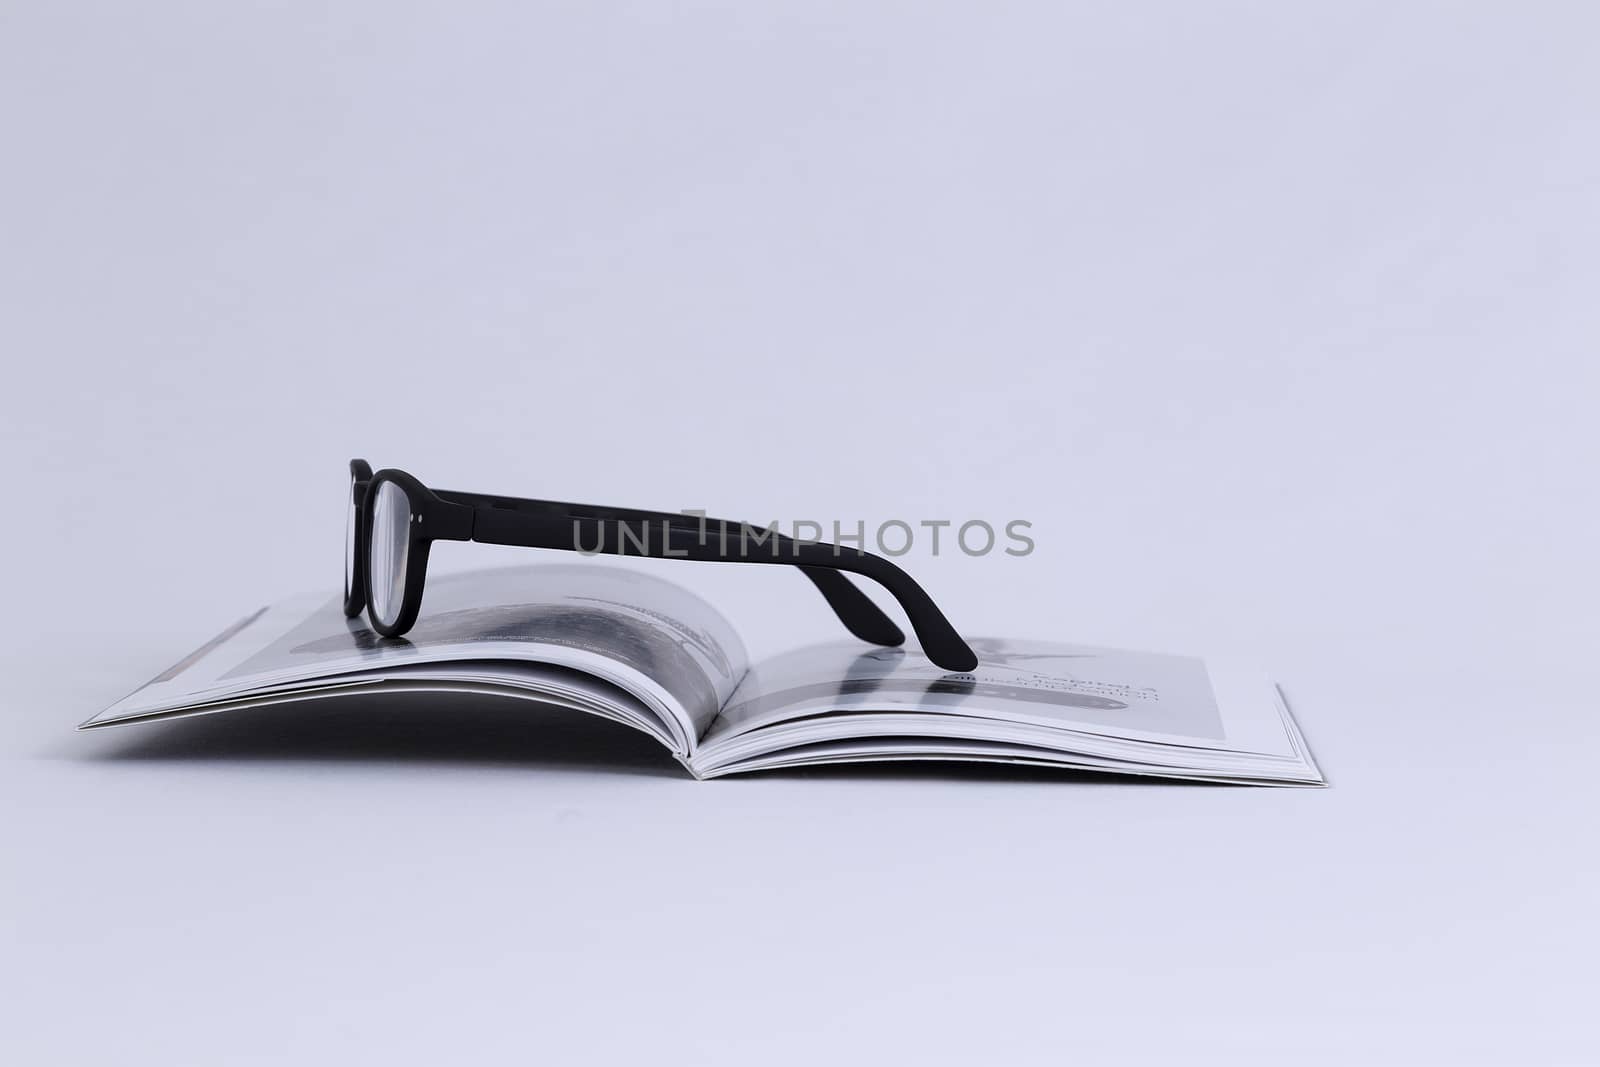 A pair of glasses on an open book  (isolated)